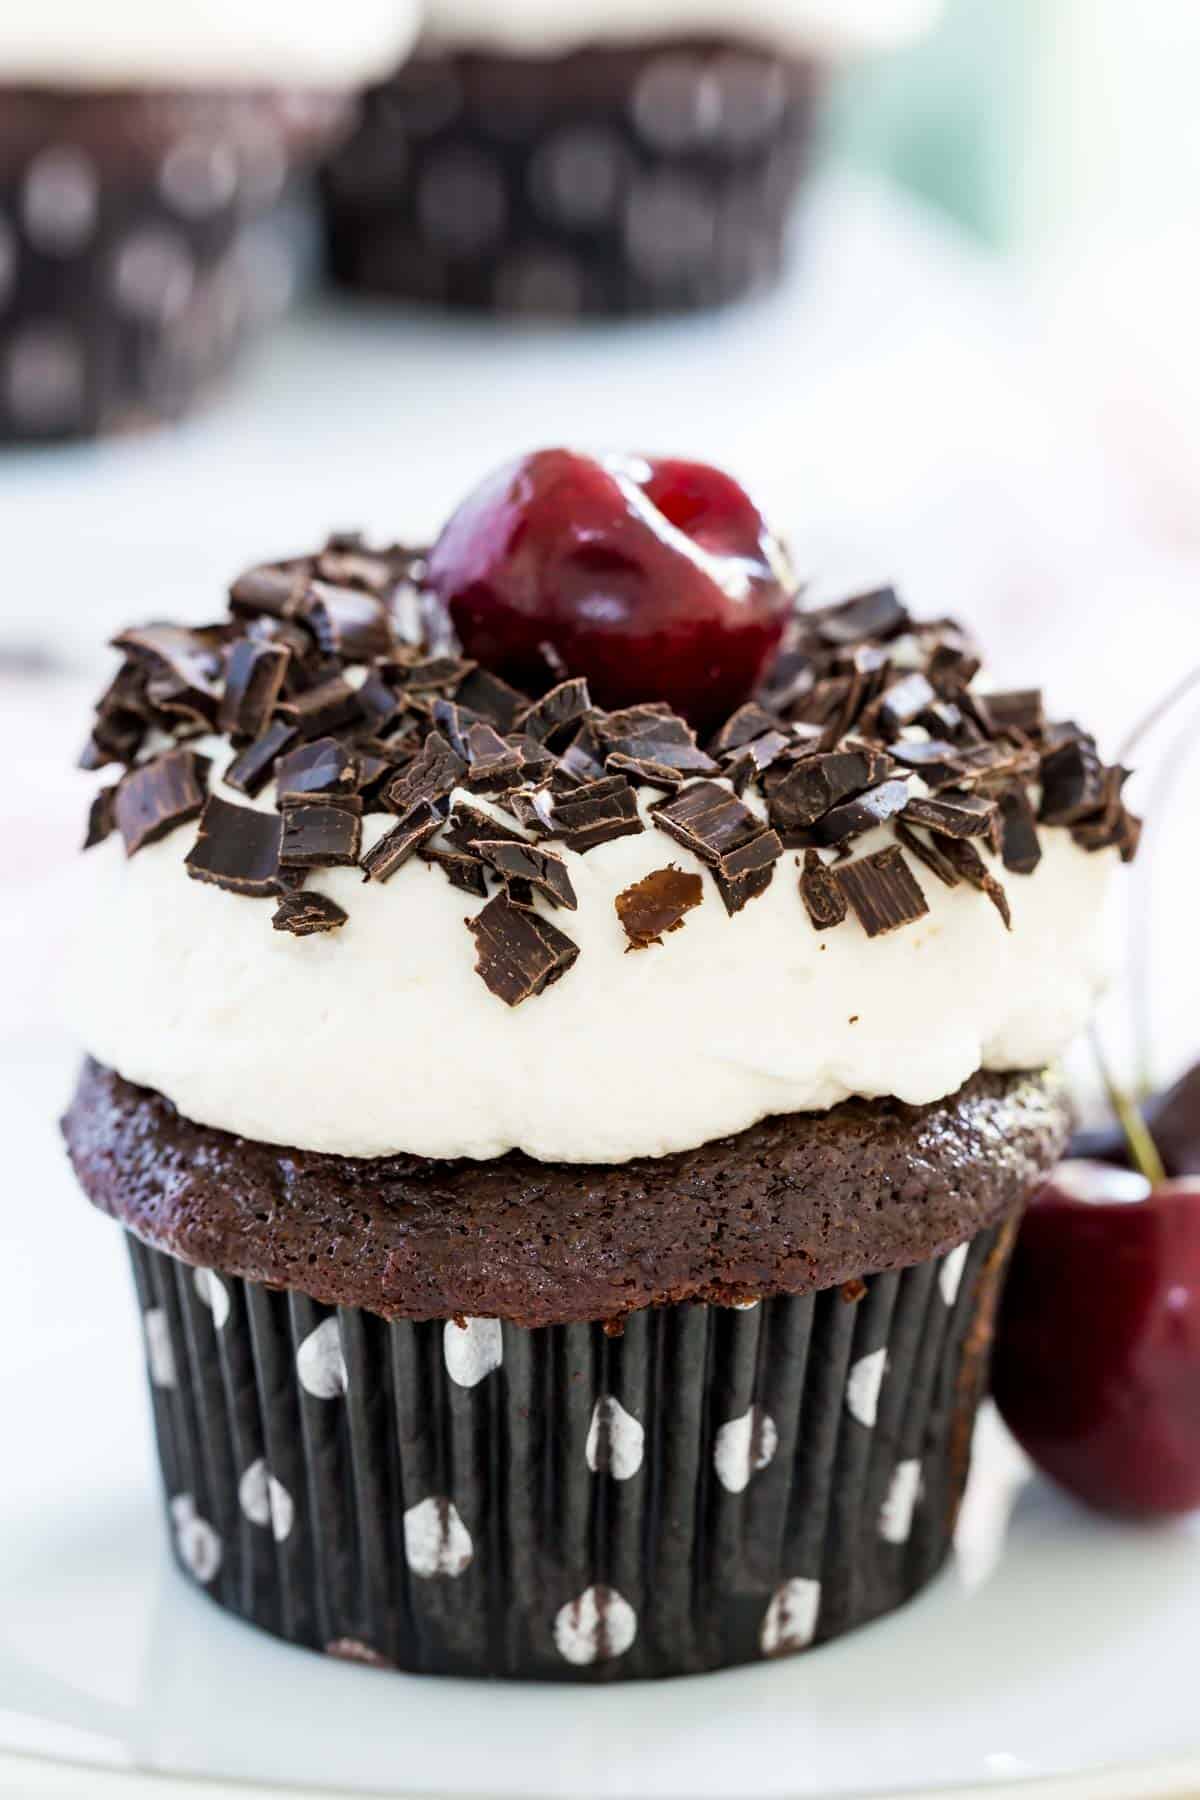 A black forest cupcake with a cherry next to it is on a white plate.